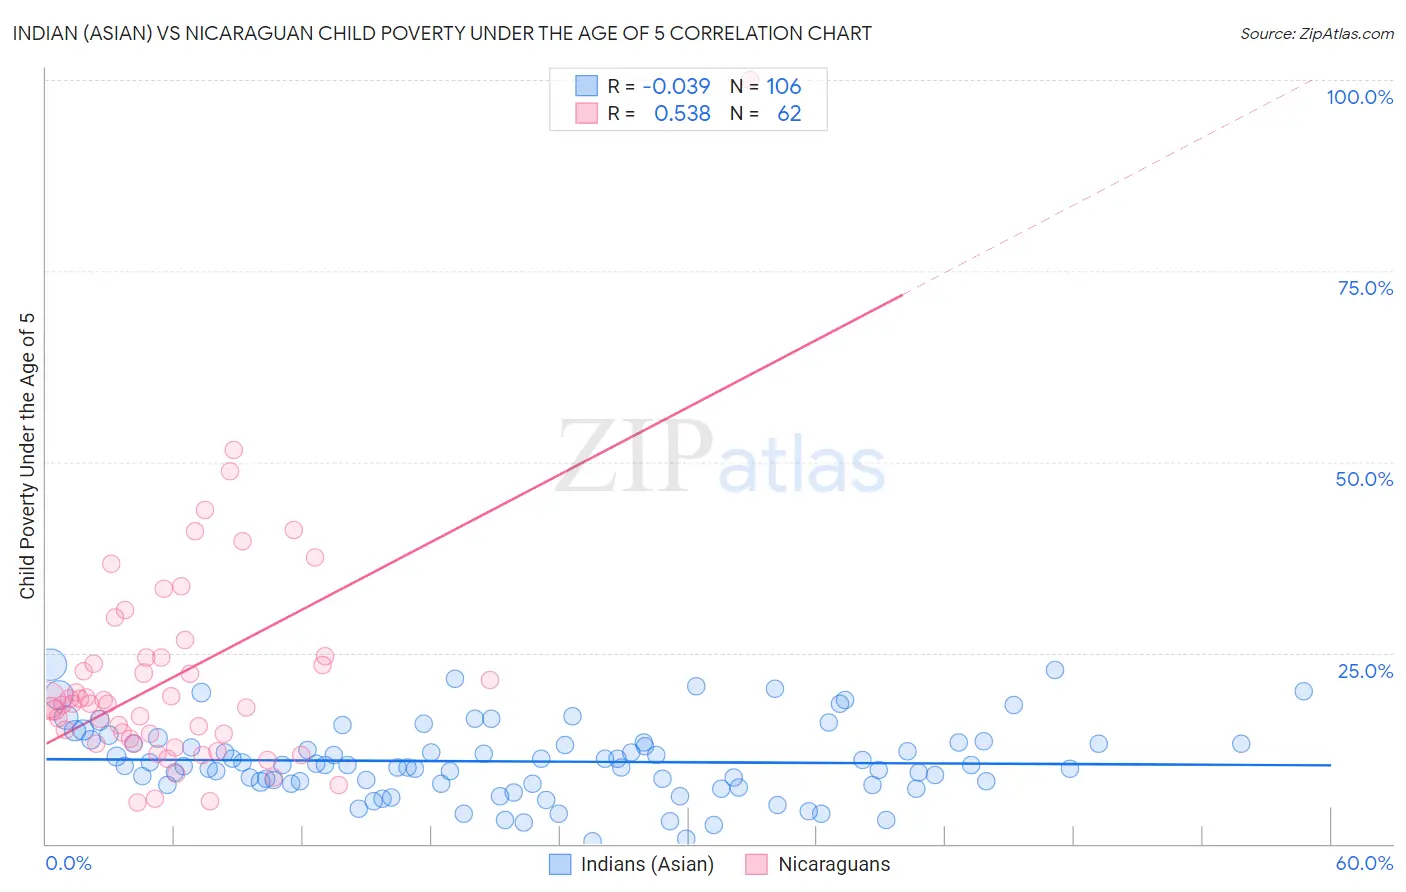 Indian (Asian) vs Nicaraguan Child Poverty Under the Age of 5